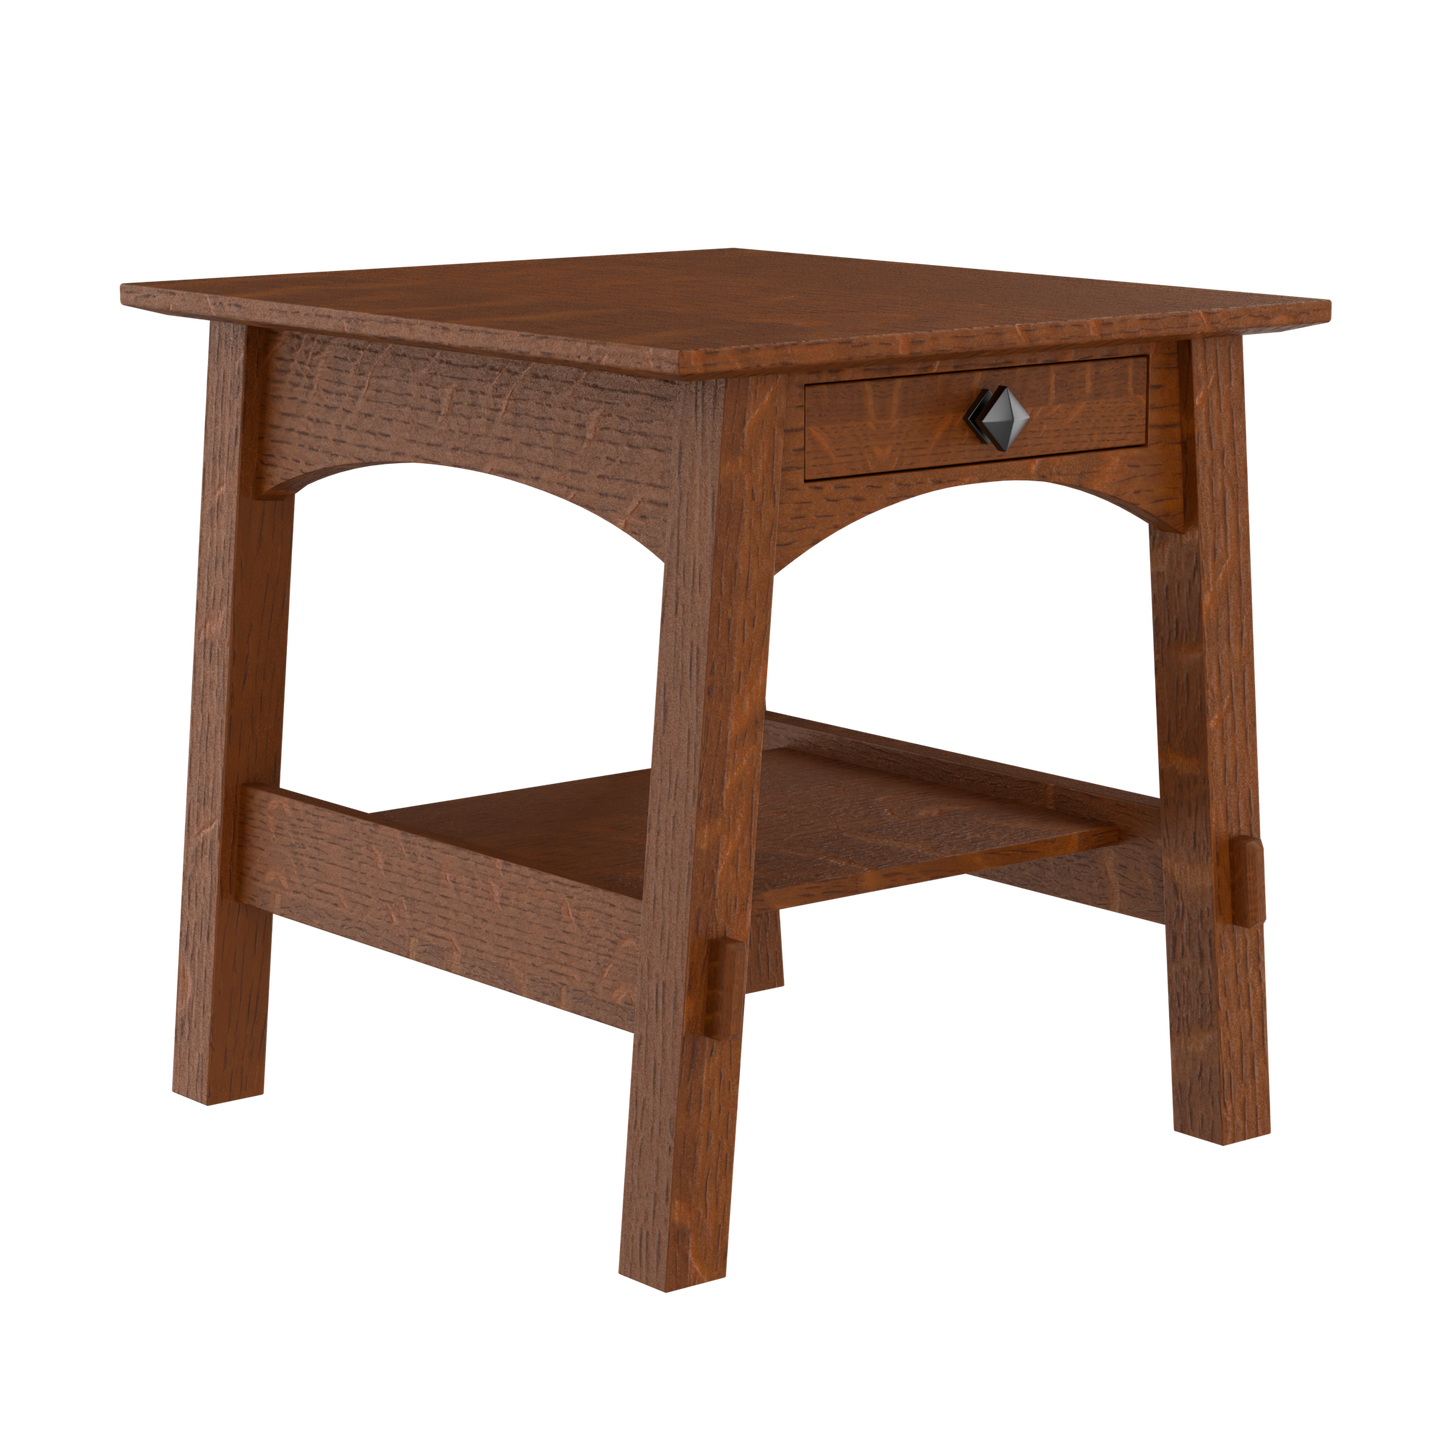 McCoy Craftsman End Table with Drawer